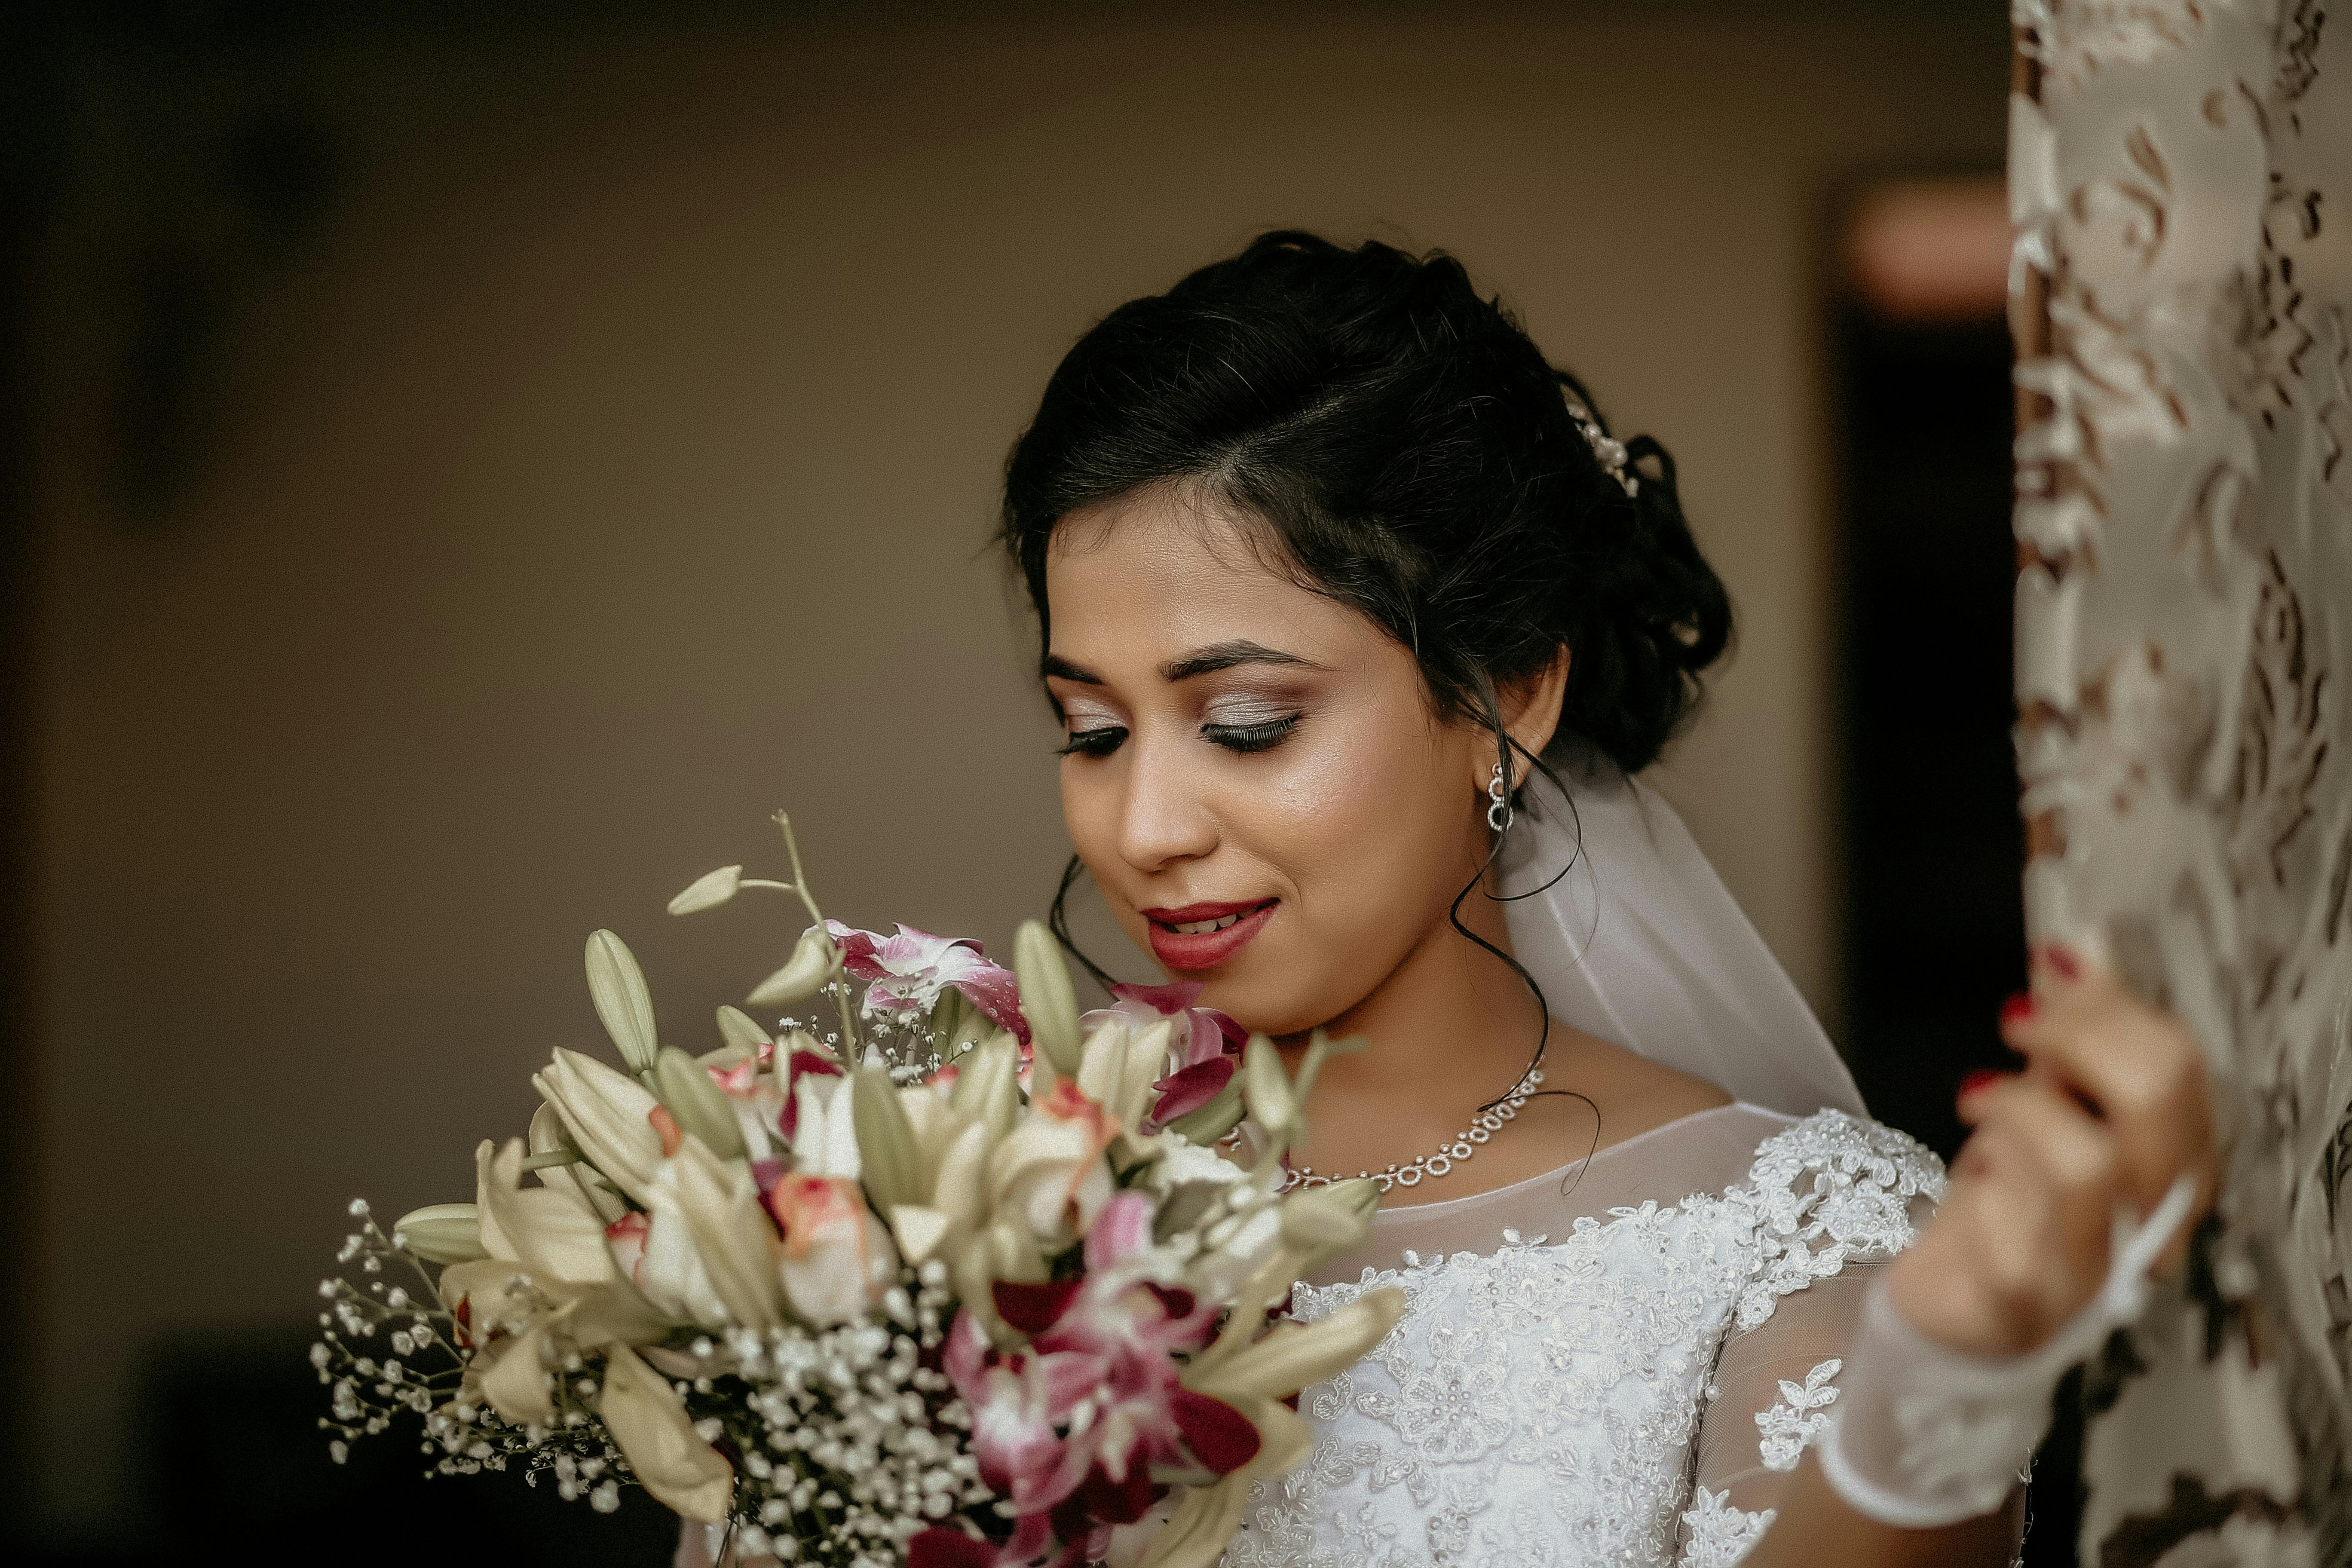 Close Up Photo of Bride Looking at Bouquet of Flowers · Free Stock Photo